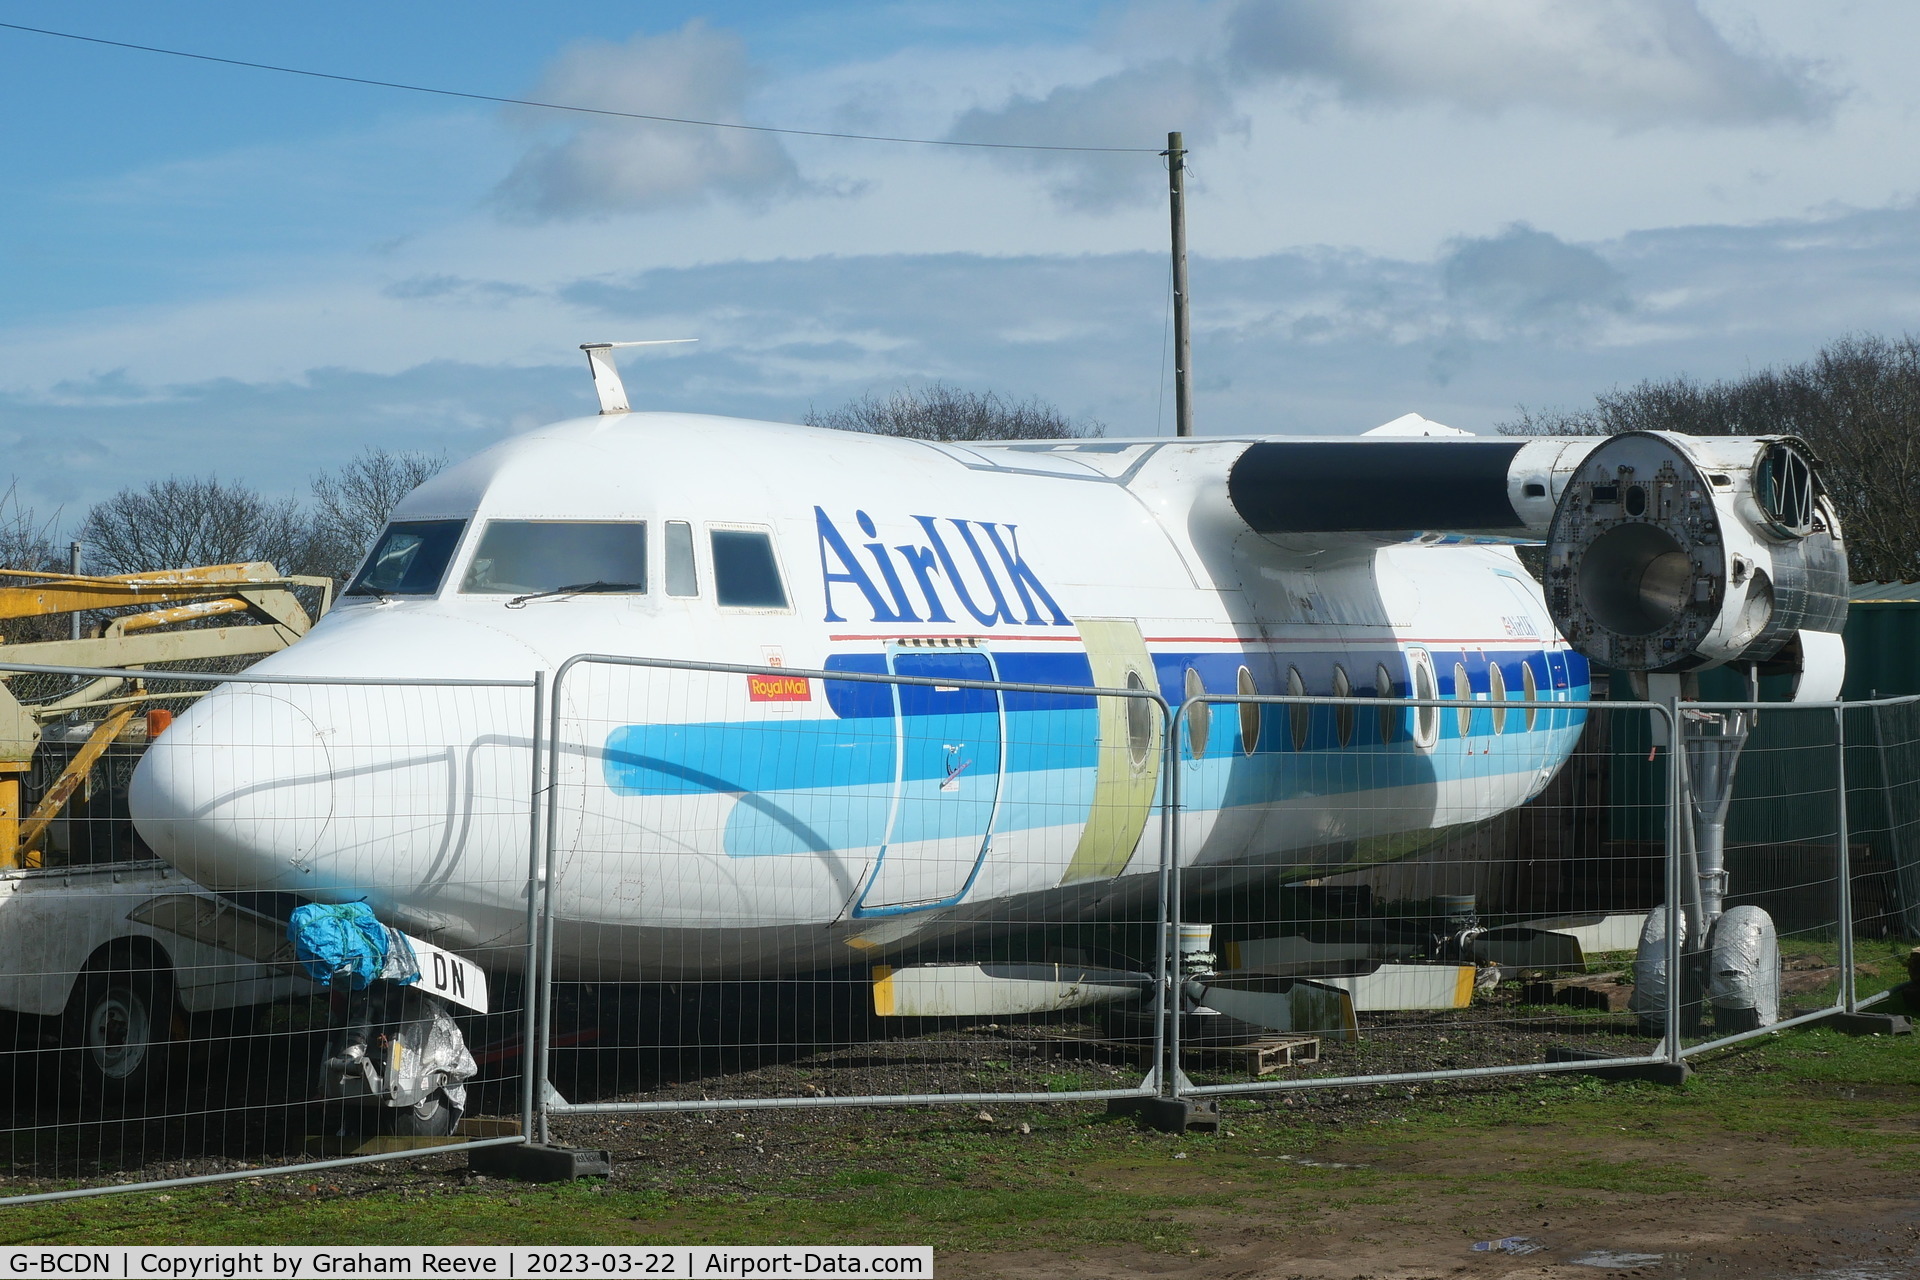 G-BCDN, 1963 Fokker F-27-200 Friendship C/N 10201, On display at the 